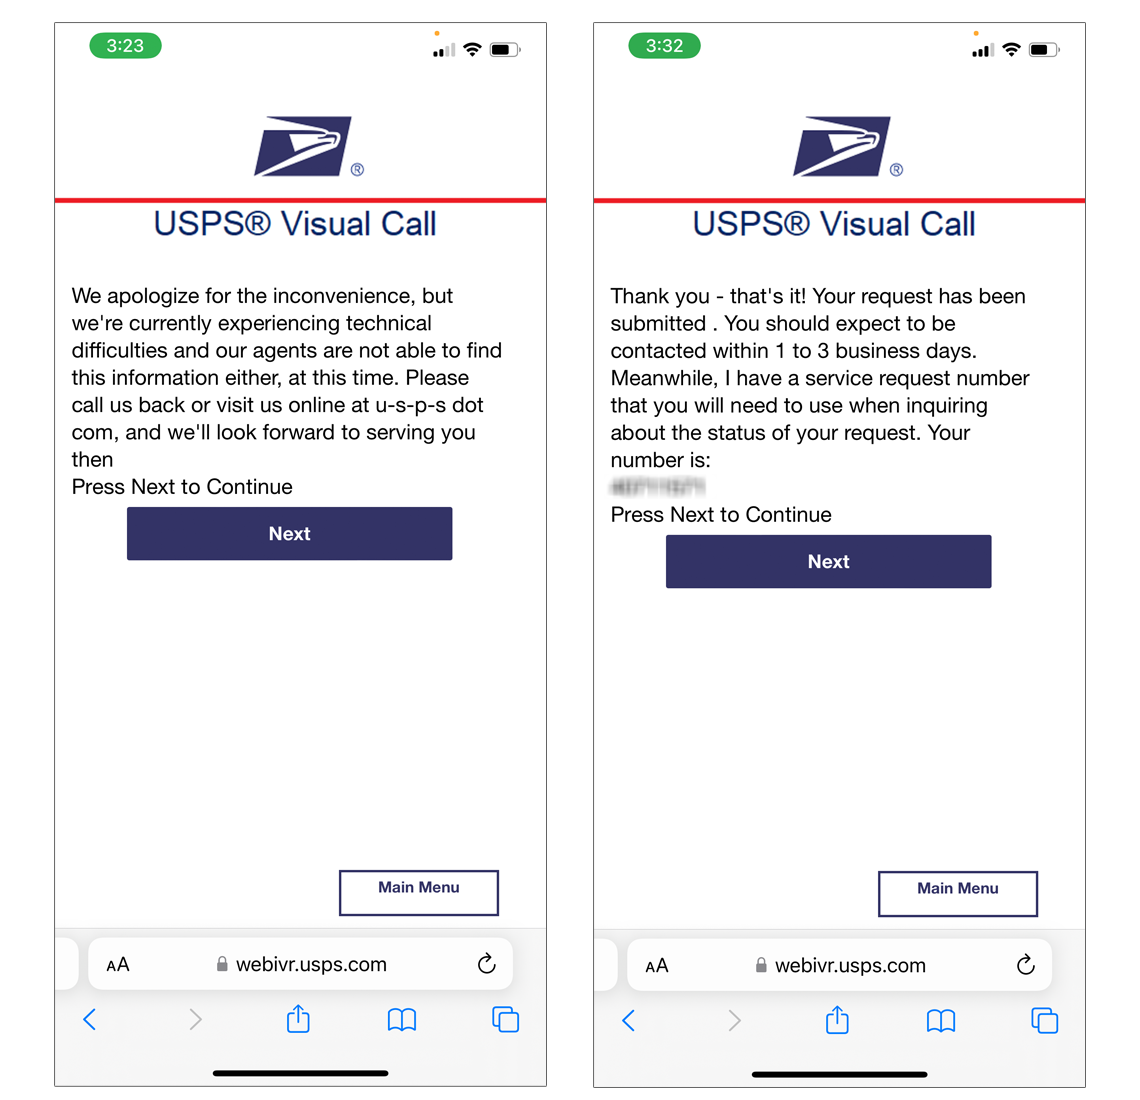 USPS visual call support